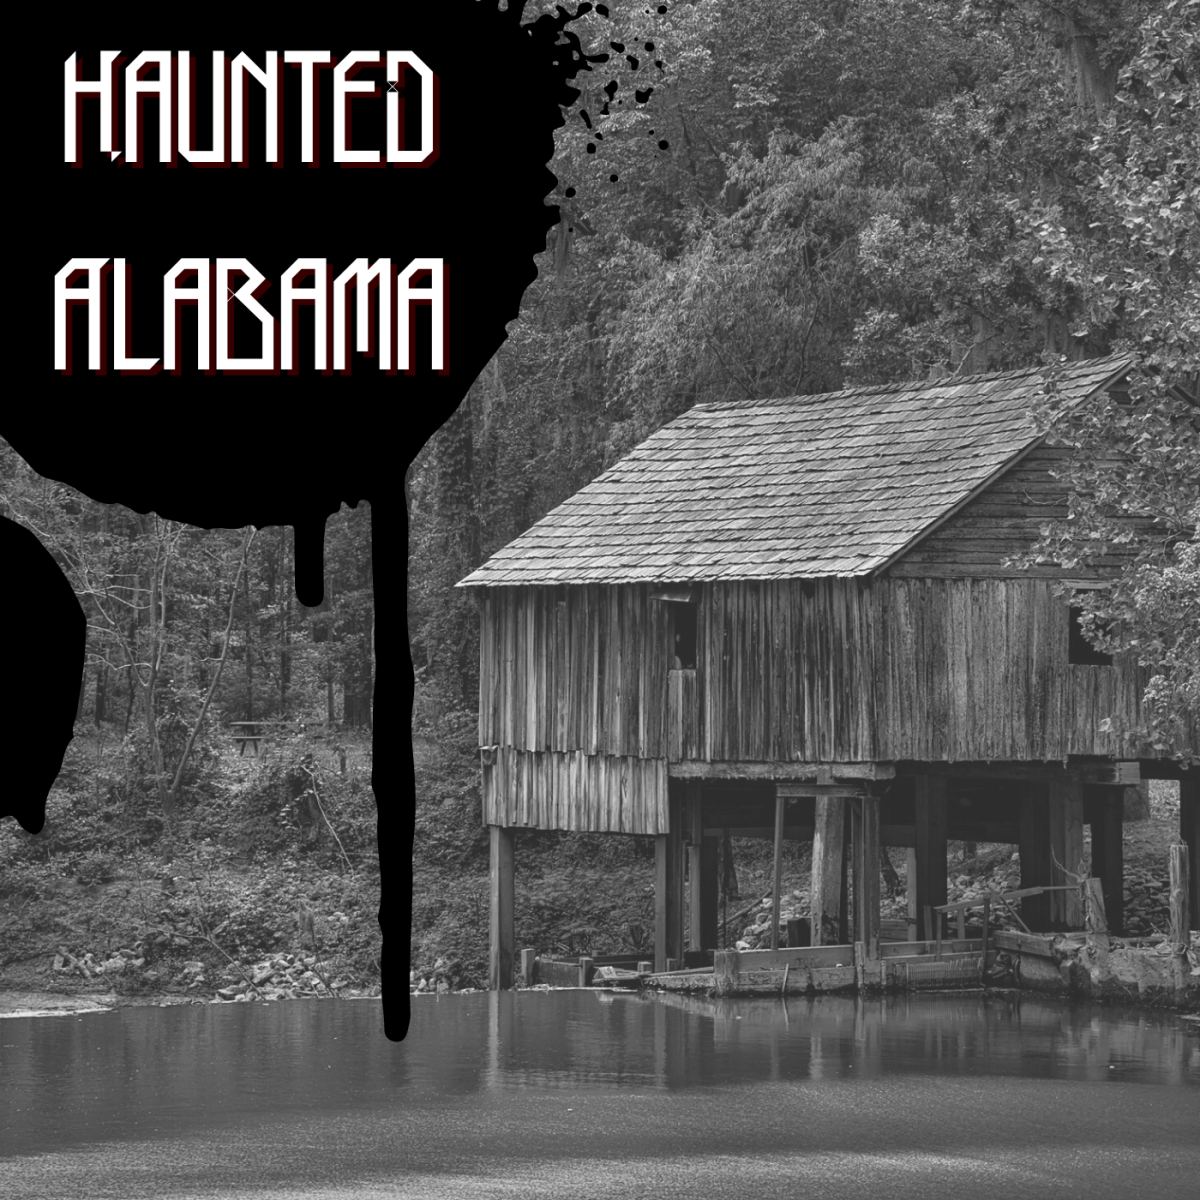 9 Most Haunted Places in Alabama to Visit